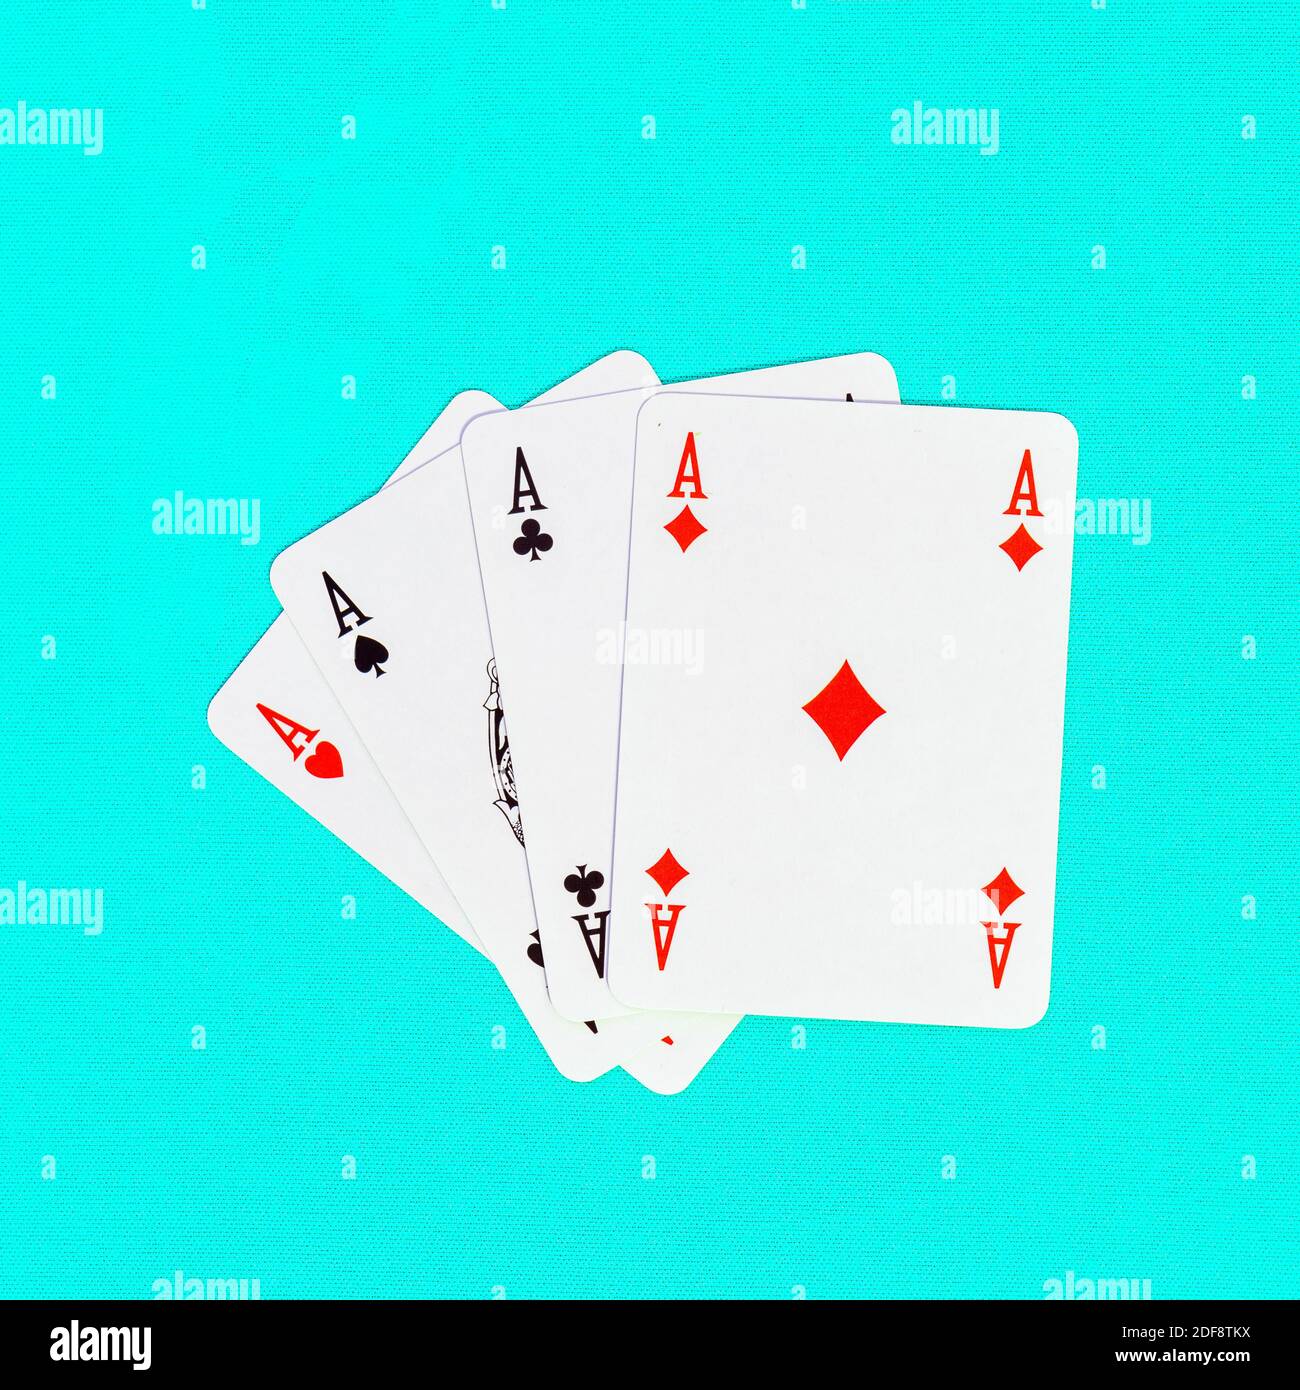 Four playing cards depicting aces, clubs, spades, diamonds, hearts on a colored background Stock Photo